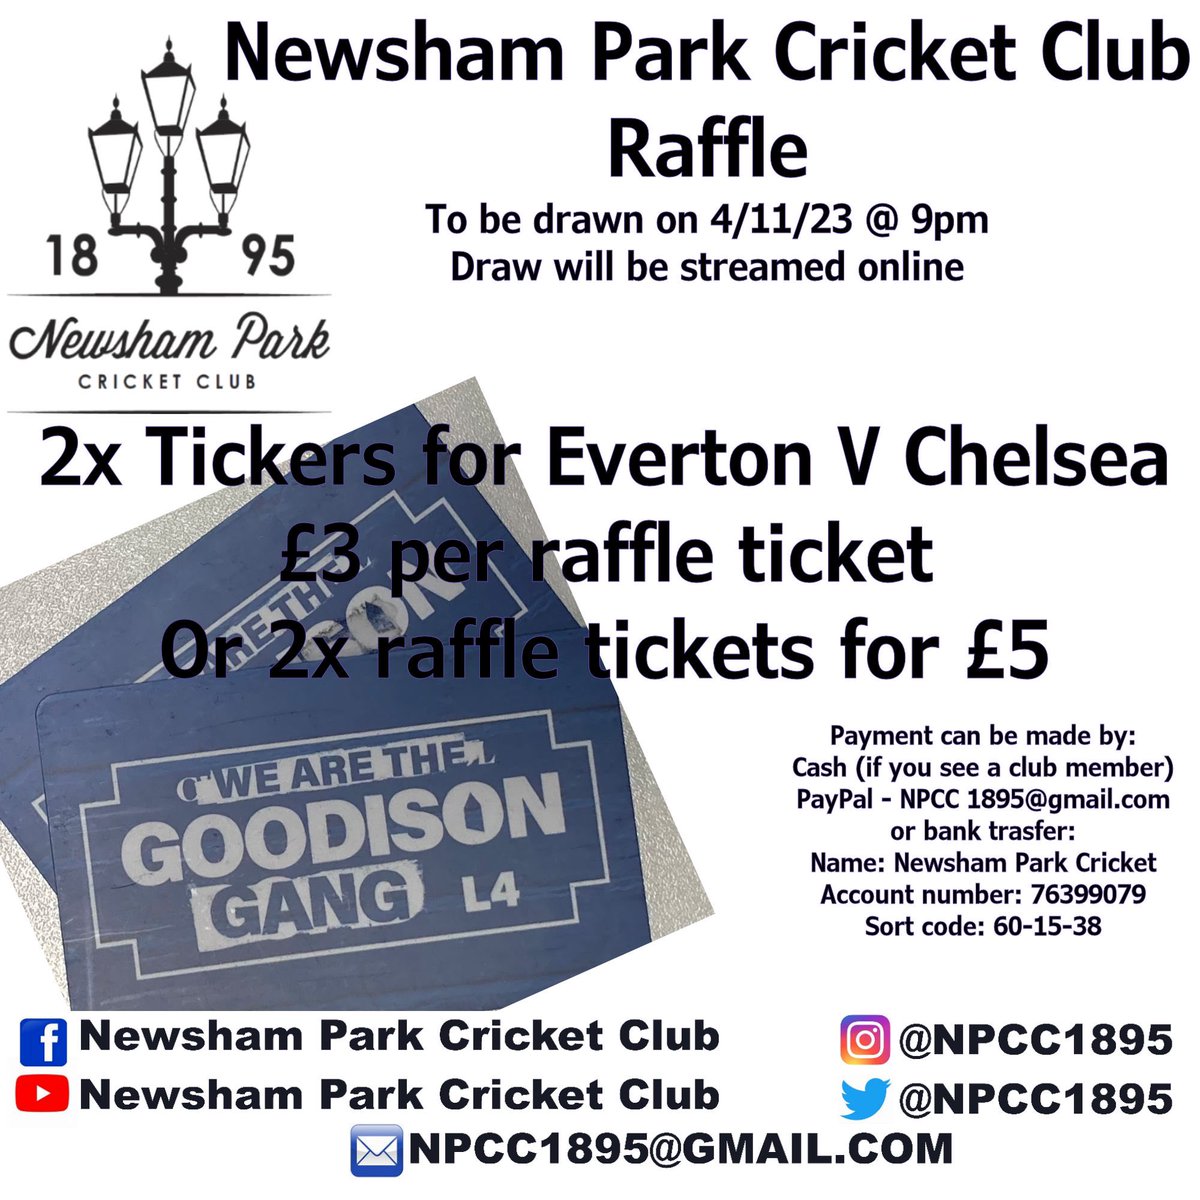 Our raffle will be drawn on Saturday at 9pm live on Instagram and Facebook if you wish to enter! Message us to get involved! #Raffle #Cricket #Fundraising #Football #Sport #Newsham #Park #NewshamPark #Everton #EvertonFC #EFC #Goodison